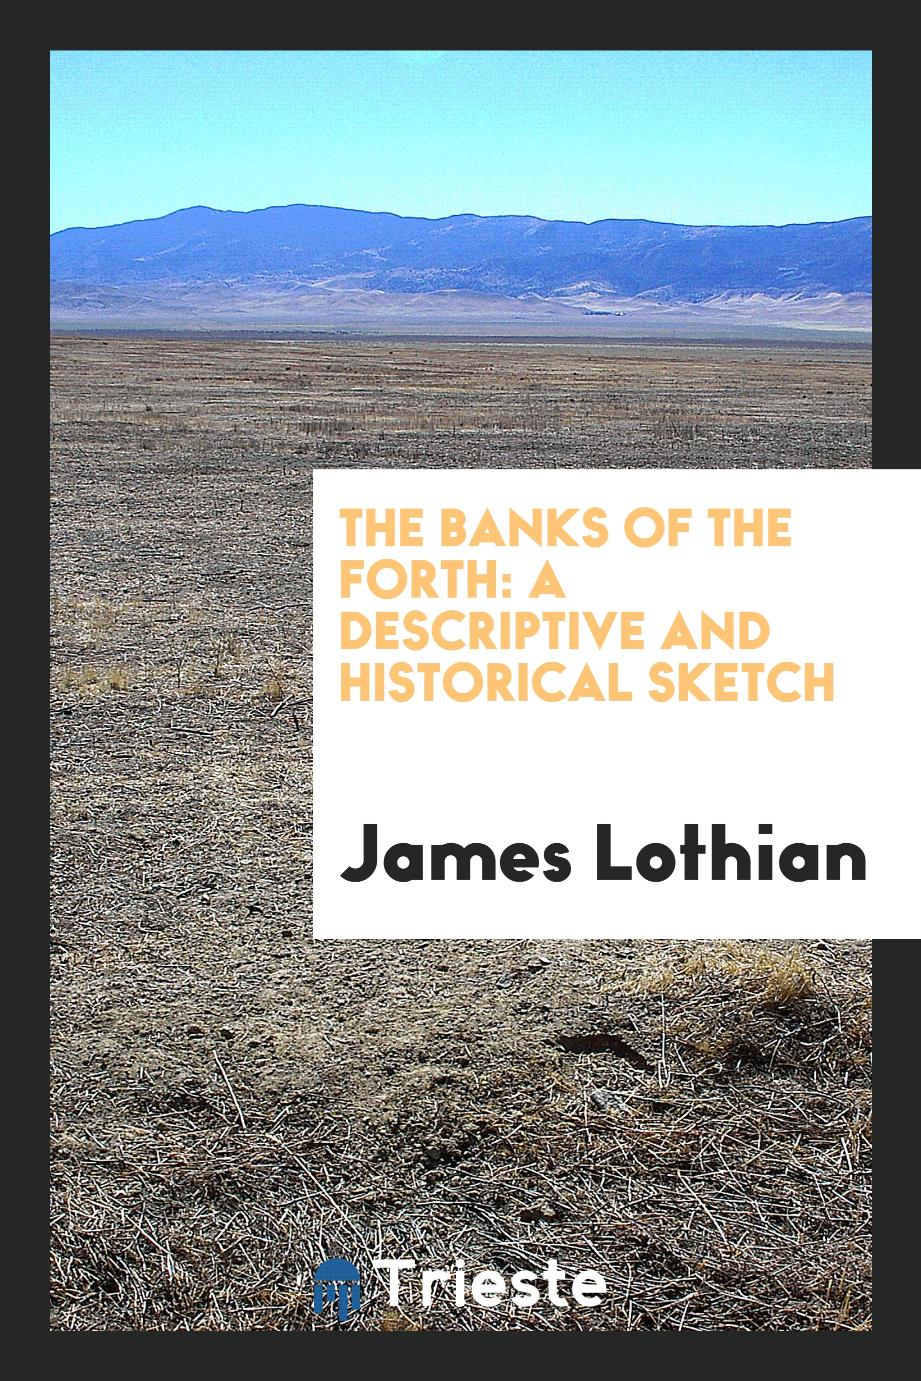 The Banks of the Forth: A Descriptive and Historical Sketch